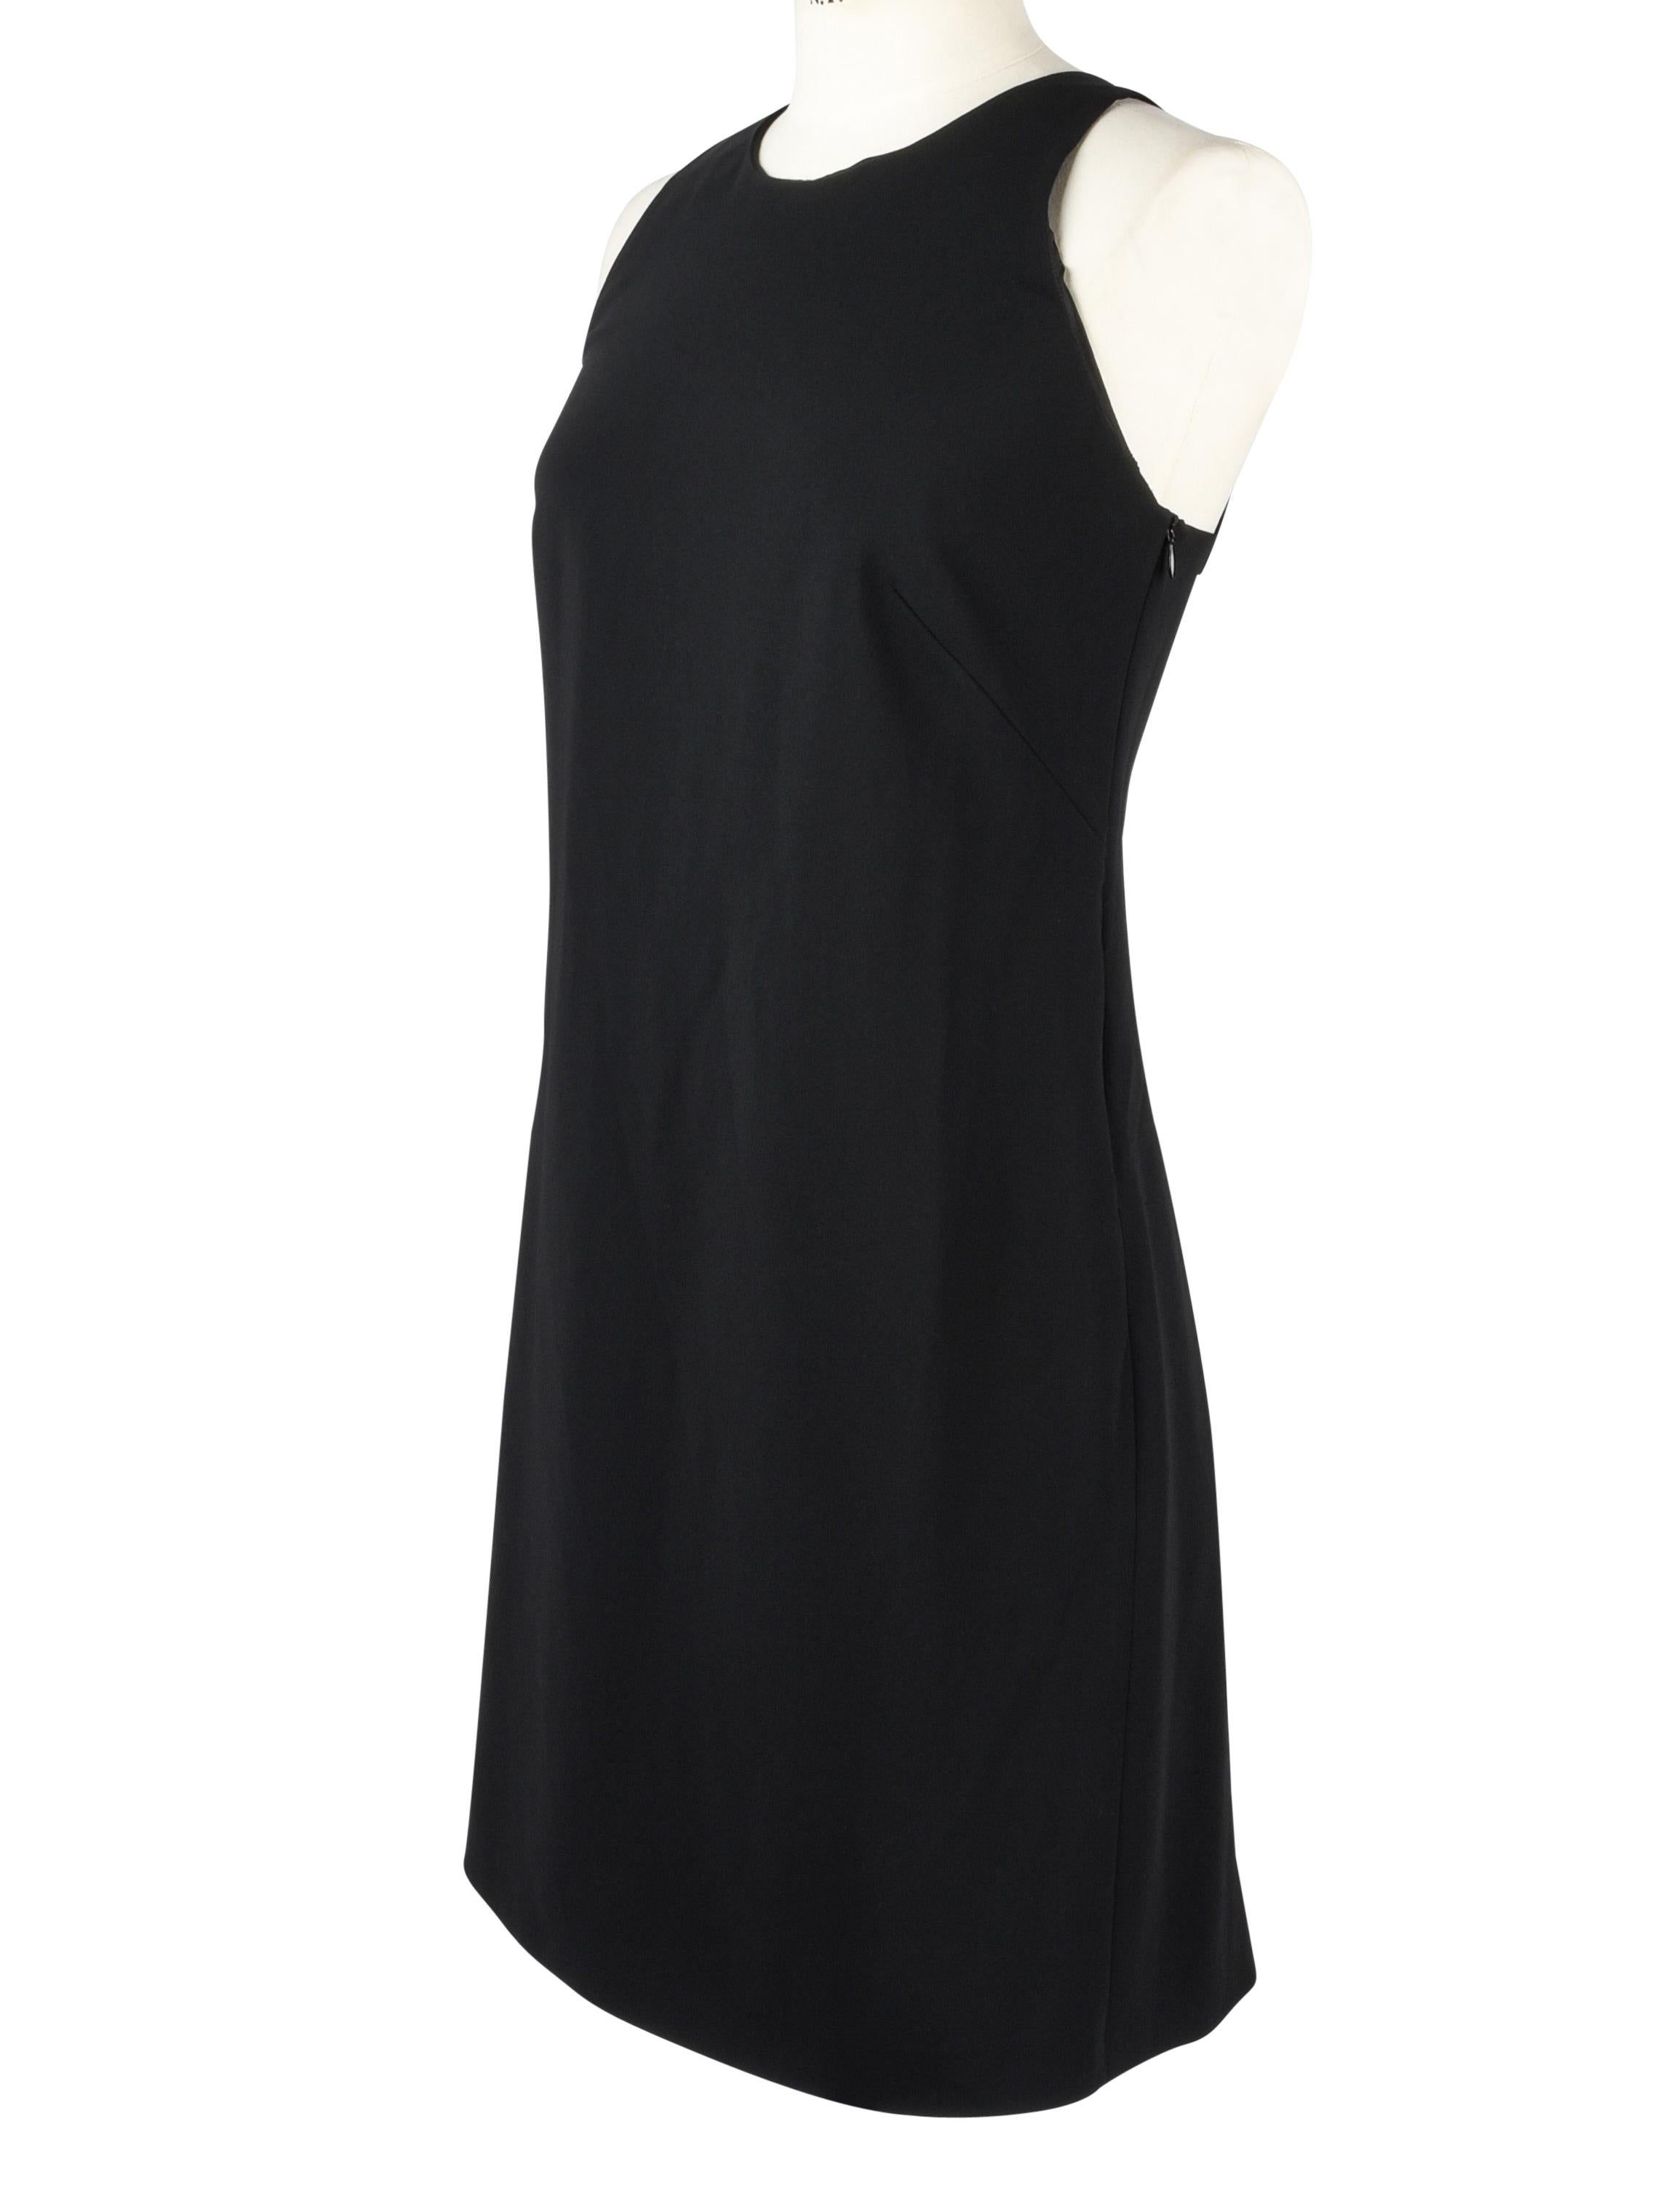 Moschino Dress Black Racer Cut Shoulder Rear Bow and Pleat Detail 42 / 8  1